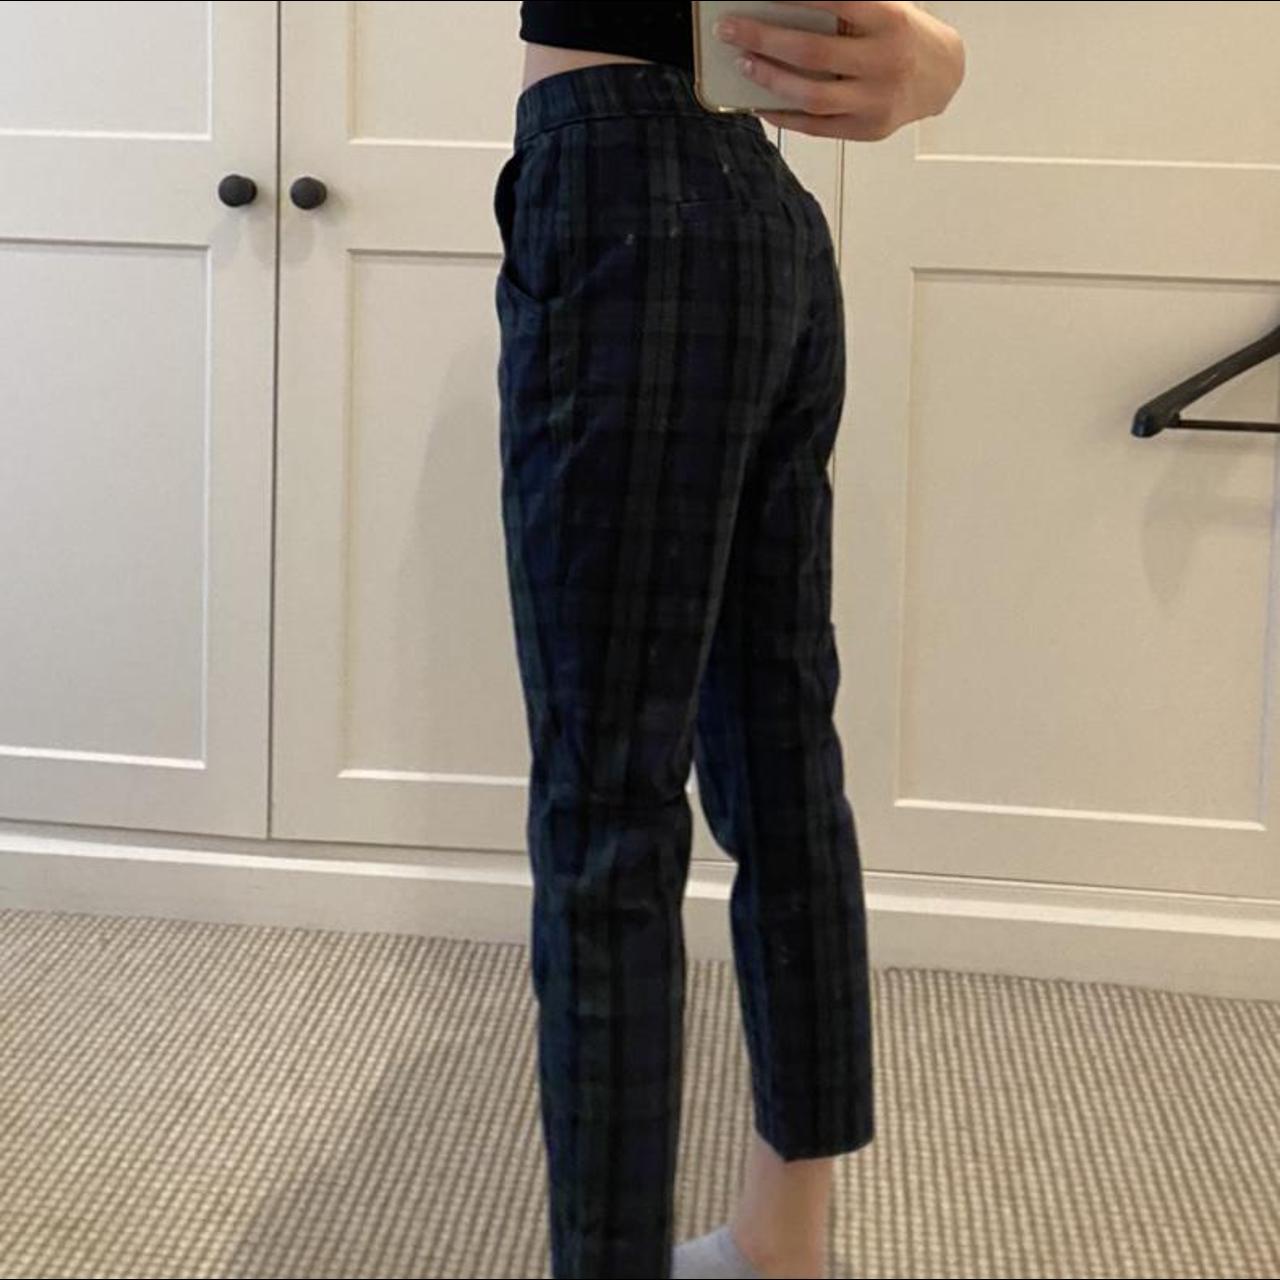 Hollister Plaid Pants Blue Size 26  35 22 Off Retail New With Tags   From Sopheavy